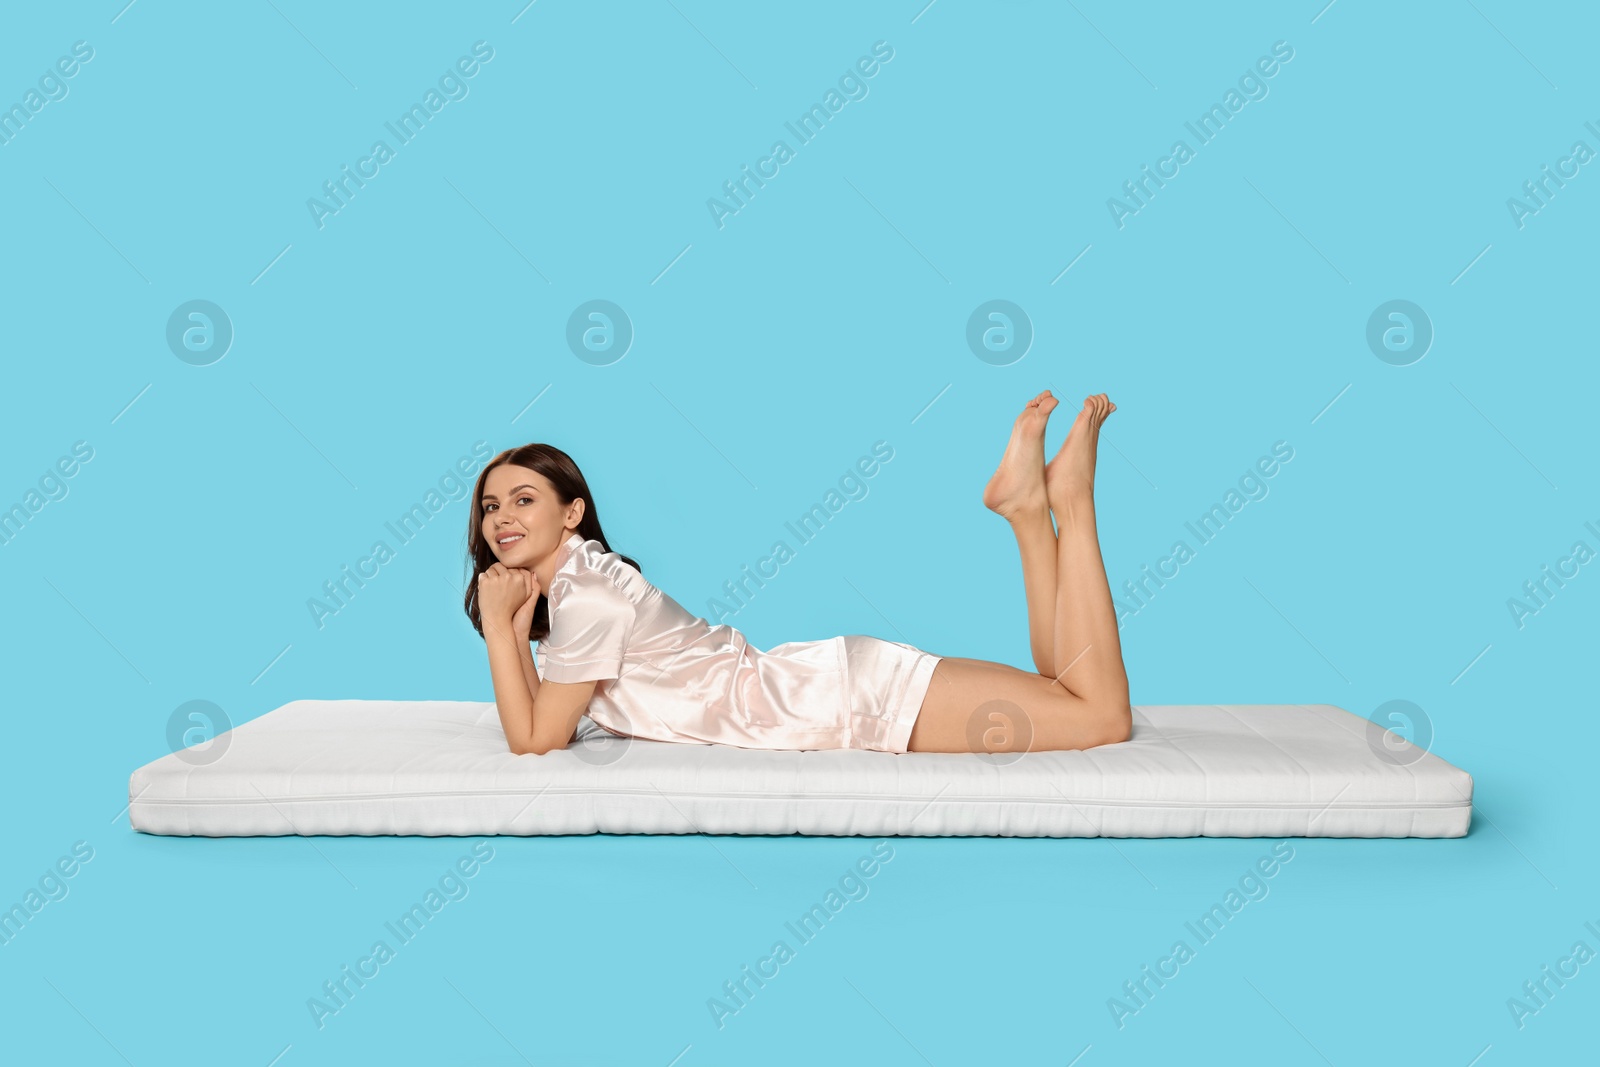 Photo of Woman lying on soft mattress against light blue background